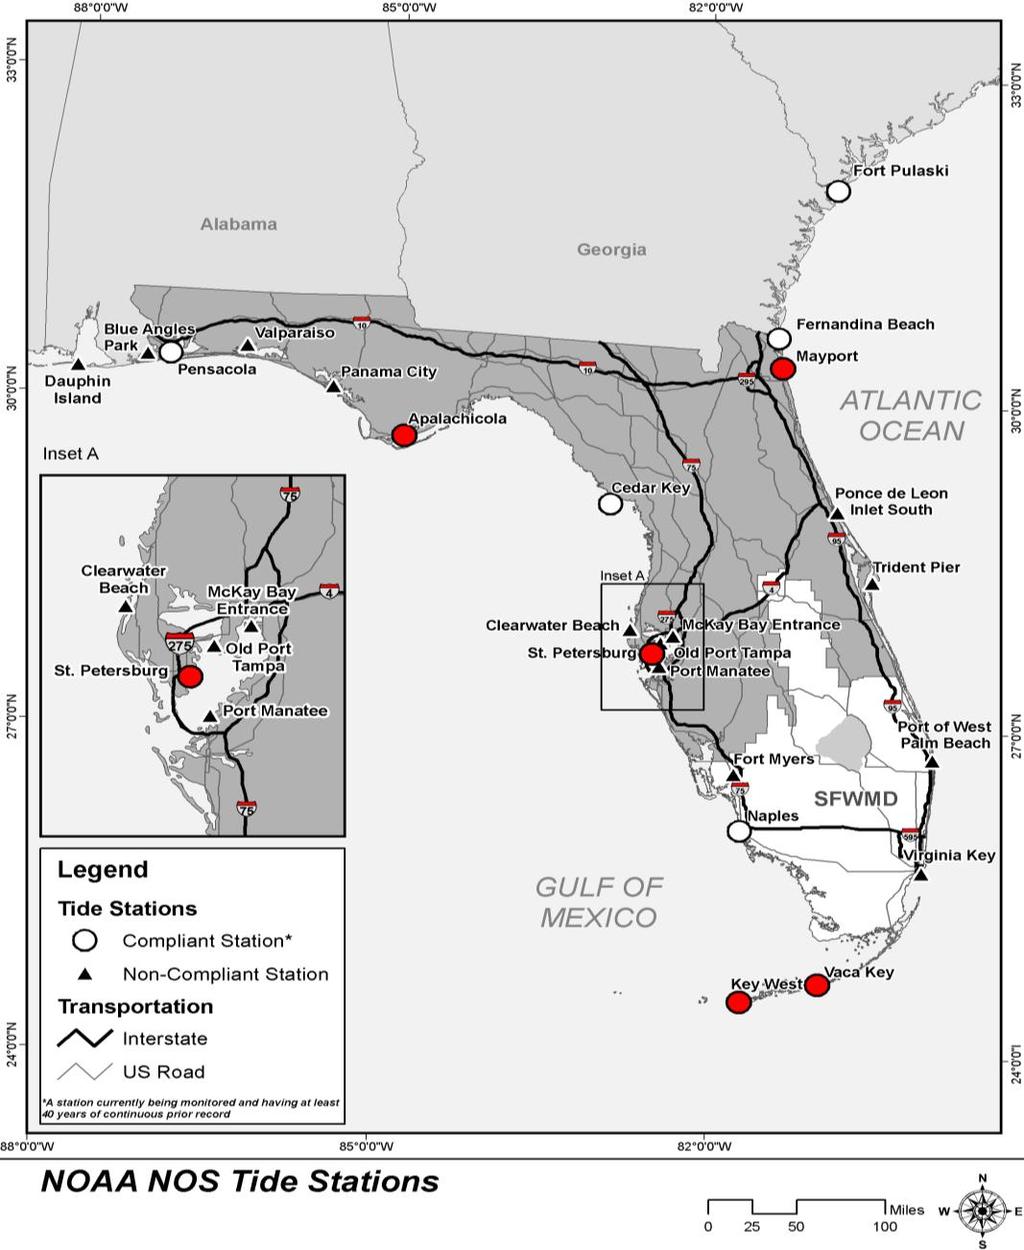 NOAA Tide Stations in GA & Florida Per USACE EC1165-2-212, a Compliant Tide Station is a station currently being monitored and having at least 40 years of continuous prior record.